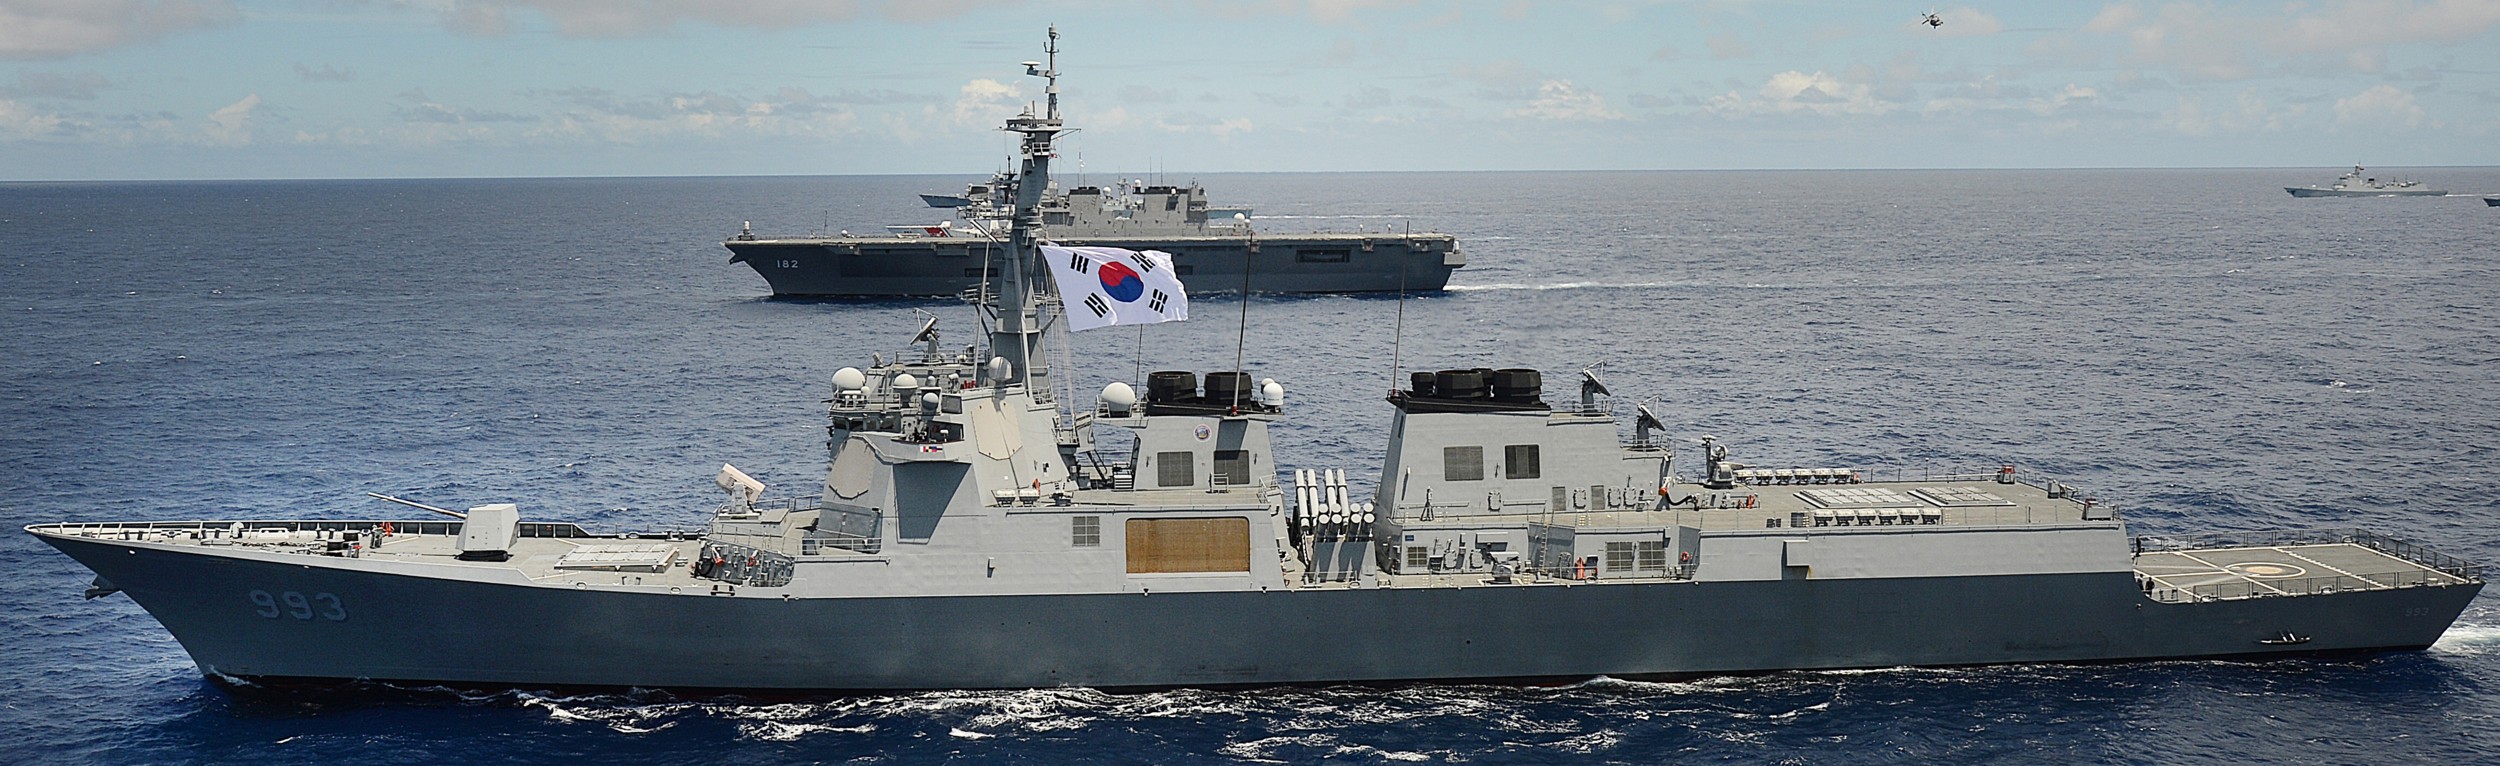 ddg-993 roks seoae ryu seong-ryong sejong the great class guided missile destroyer aegis republic of korea navy rokn 24